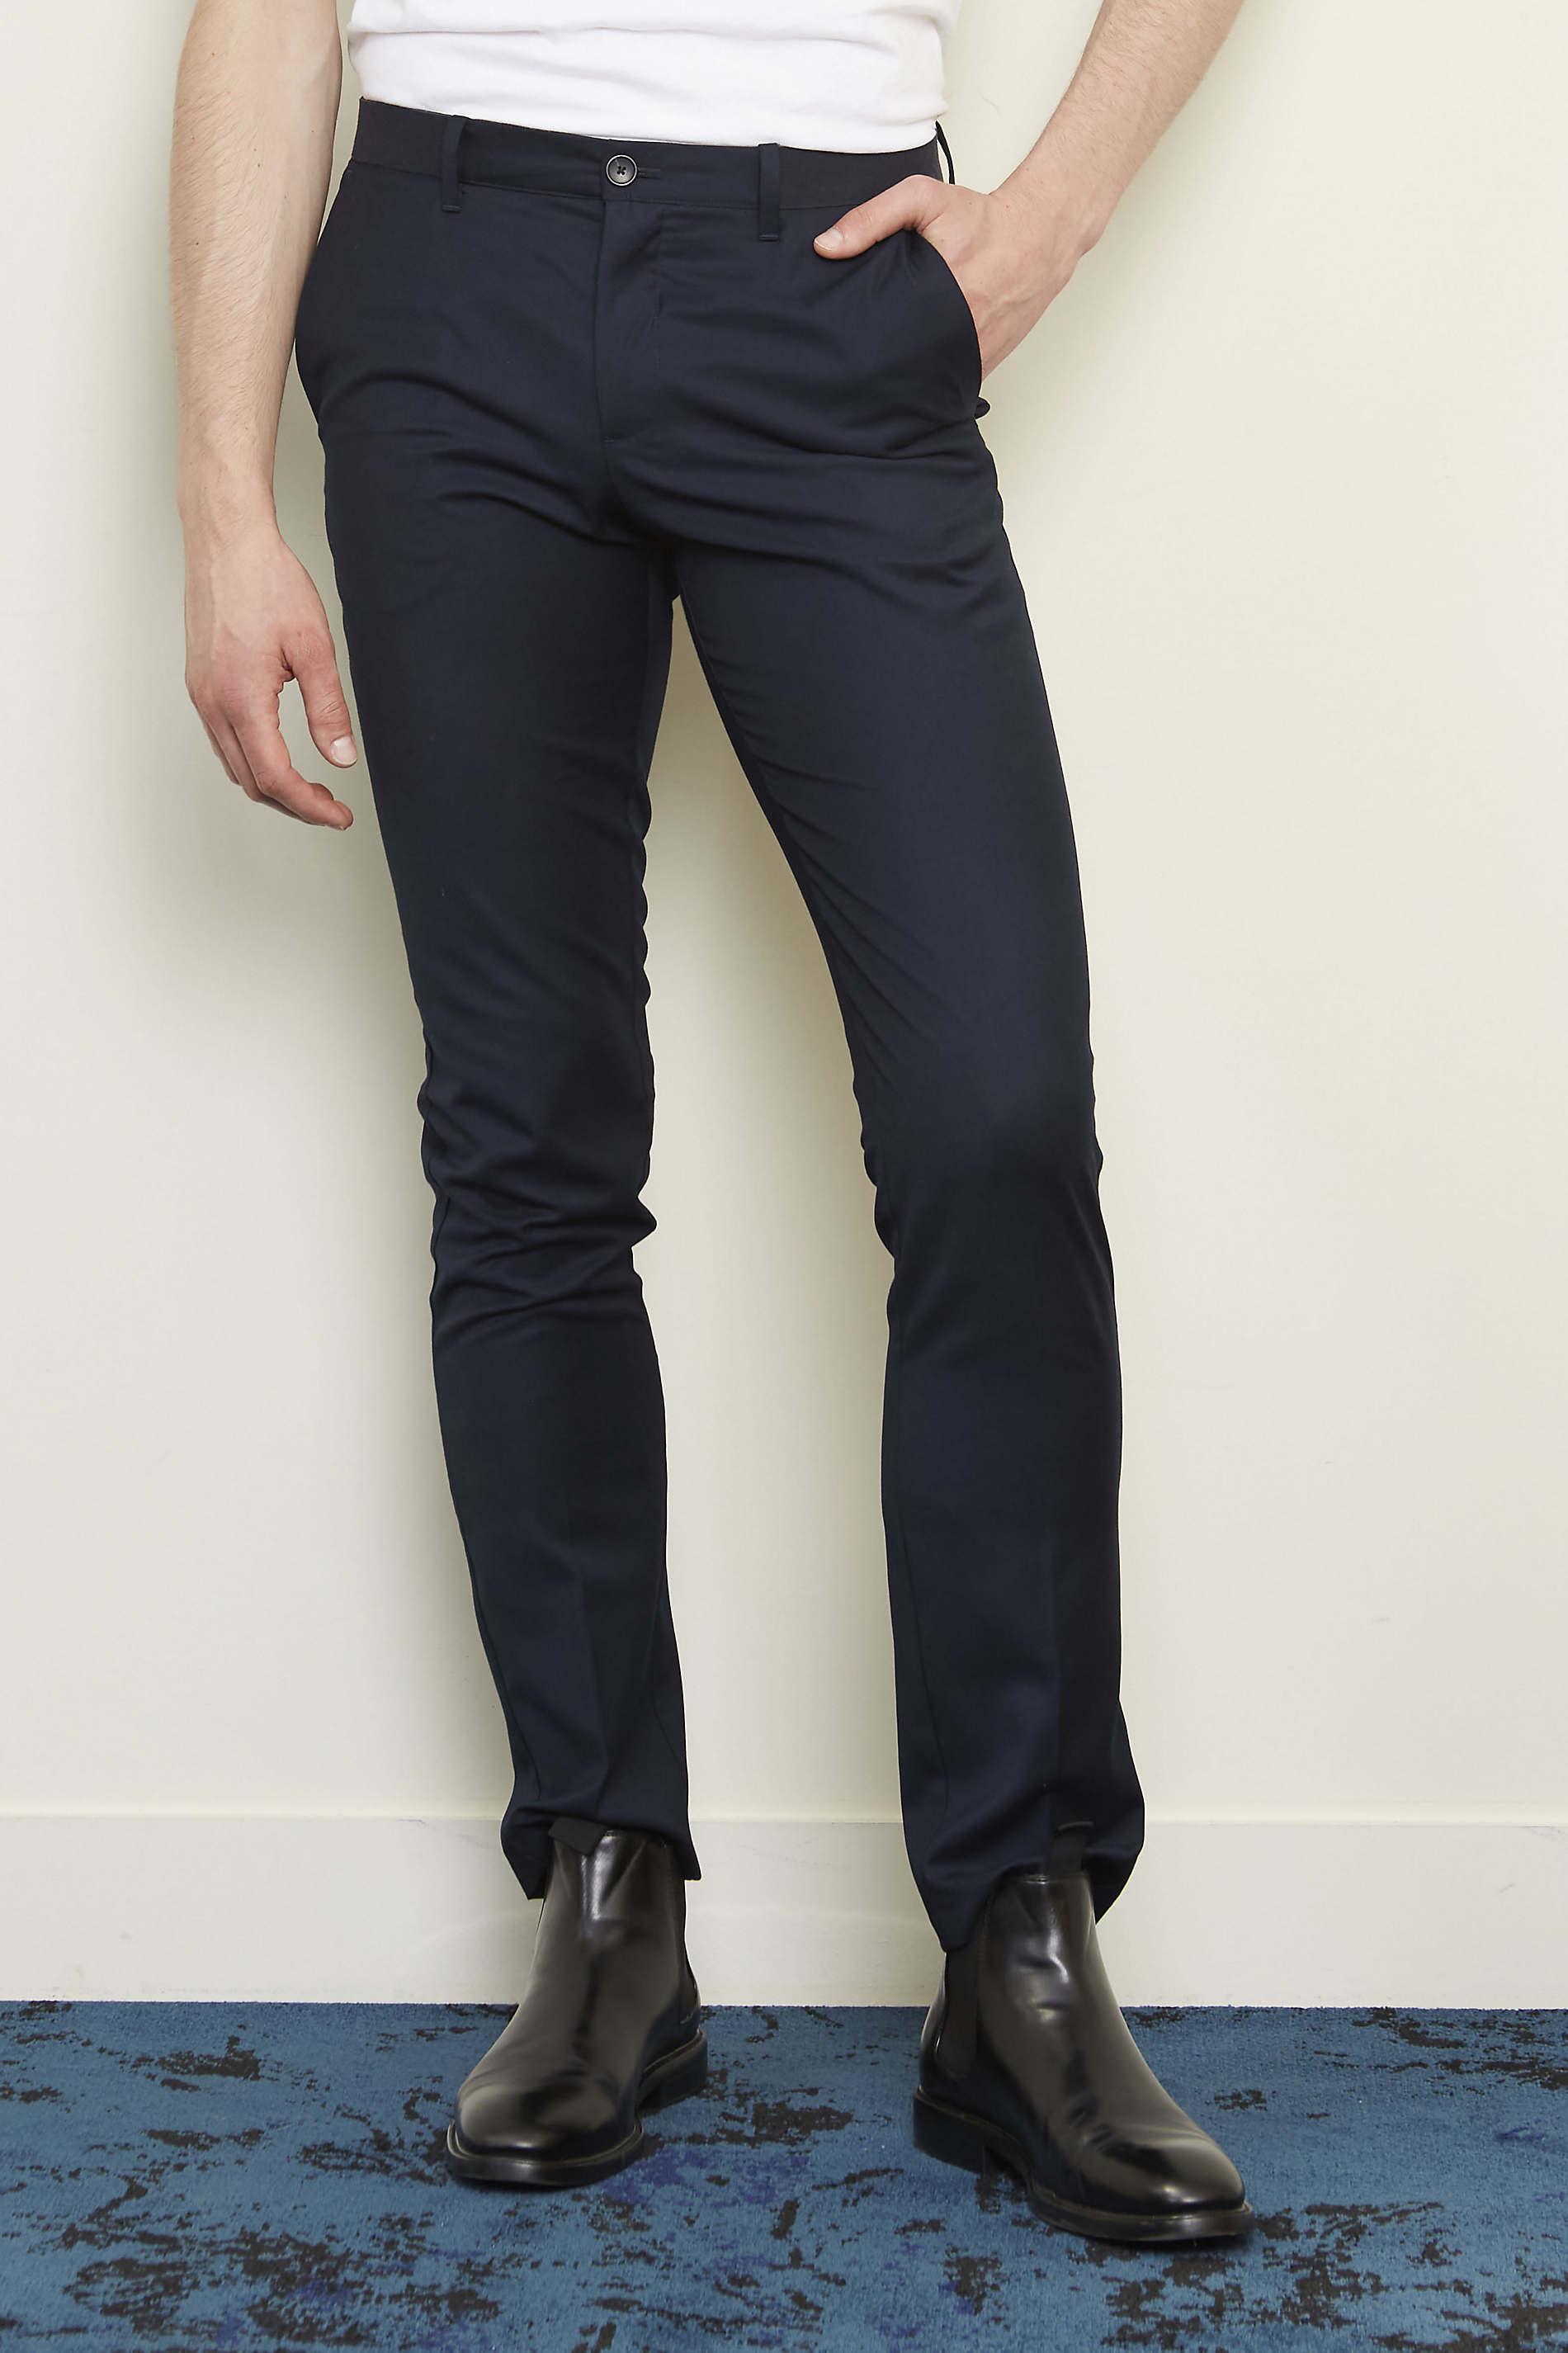 MEN'S ELASTICATED WAIST SUIT TROUSERS<p>These smart and timeless trousers are an iconic piece of men’s wardrobe. With their mid-season soft fabric and elasticated waistband, they fit all body shapes. They can be worn as a part of a three-piece suit for formal events or with a T-shirt for a casual style.</p> NEOBLU GABIN MEN